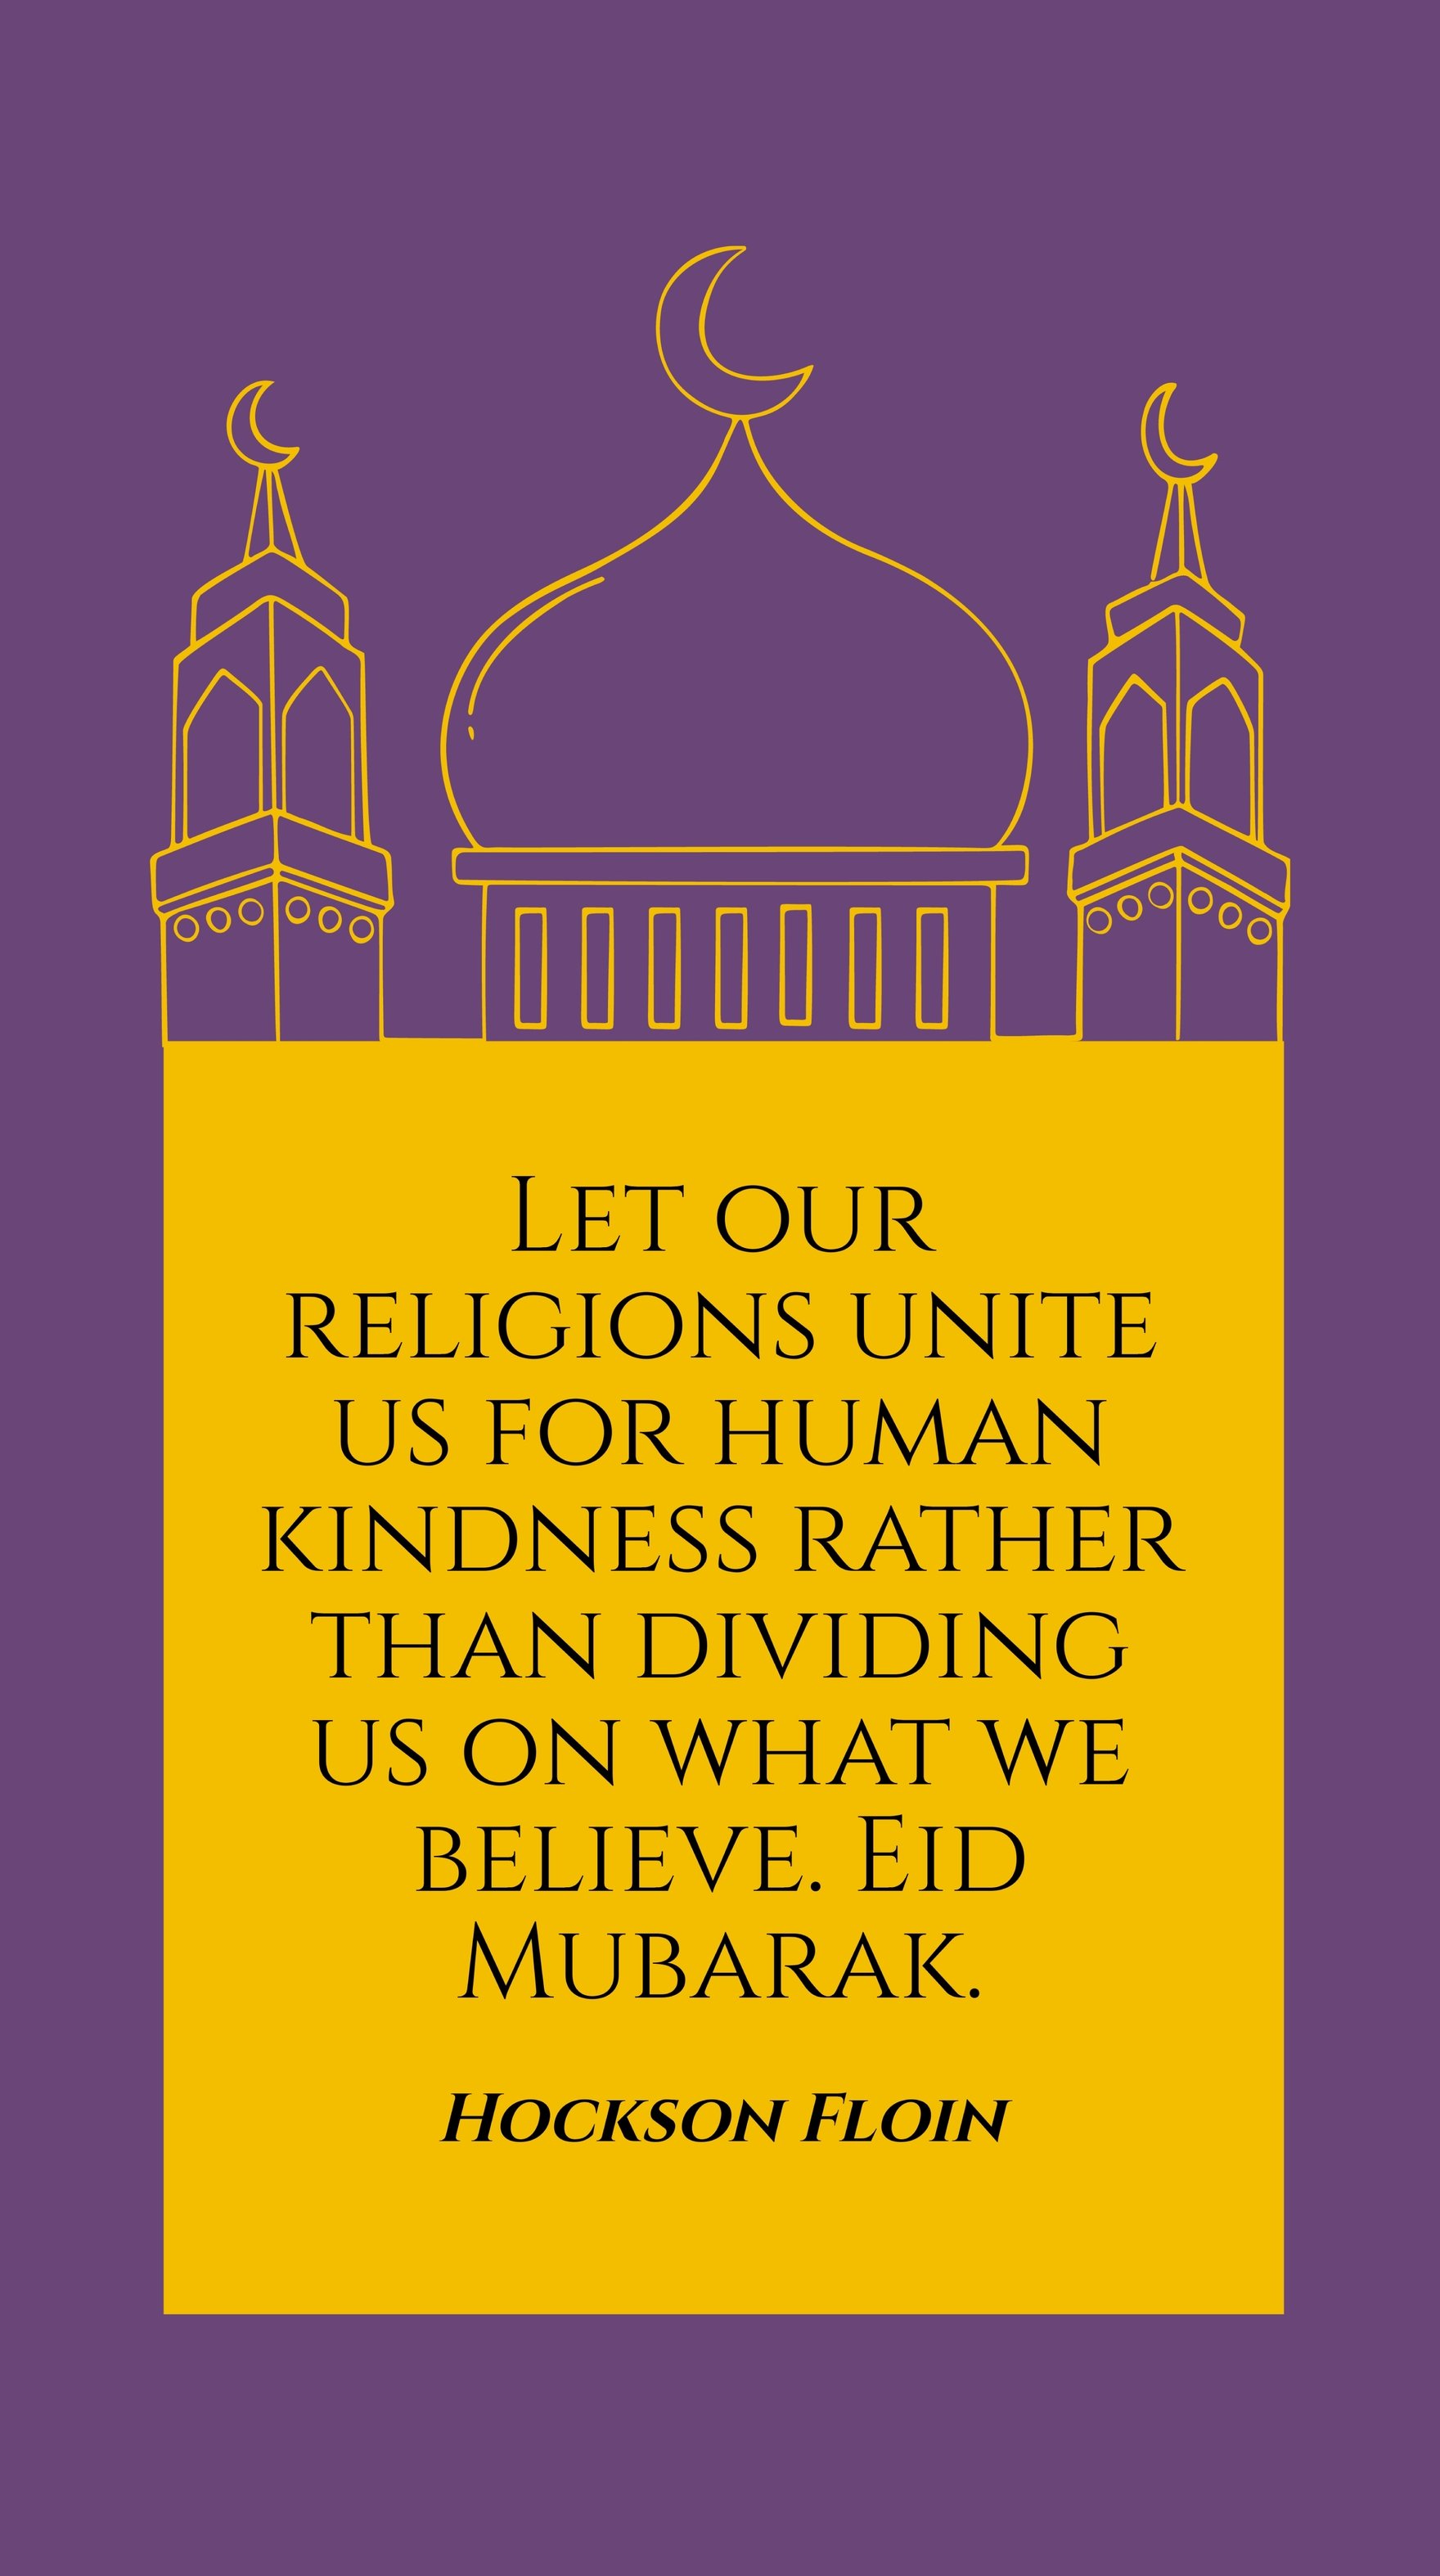 Hockson Floin - Let our religions unite us for human kindness rather than dividing us on what we believe. Eid Mubarak.